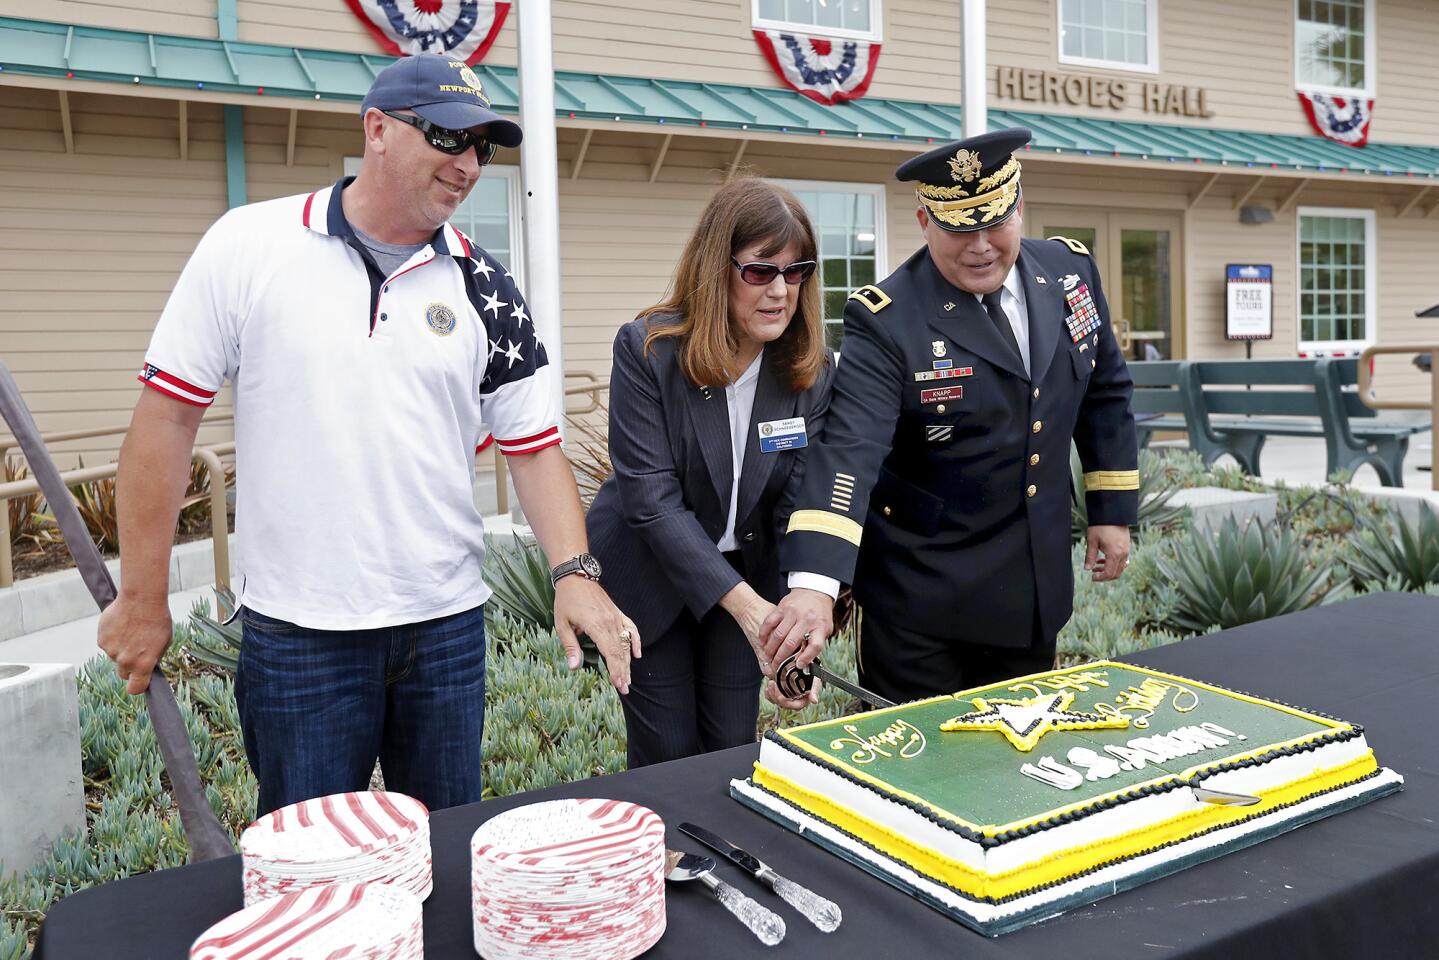 From left, Nick Giordano of American Legion Newport Harbor Post 291, Post 291 3rd Vice Commander Sandy Schneeberger and Brig. Gen. Denton Knapp, commander of the Army component of the California State Military Reserve, cut the ceremonial cake as they celebrate the Army's 244th anniversary Friday at Heroes Hall in Costa Mesa.